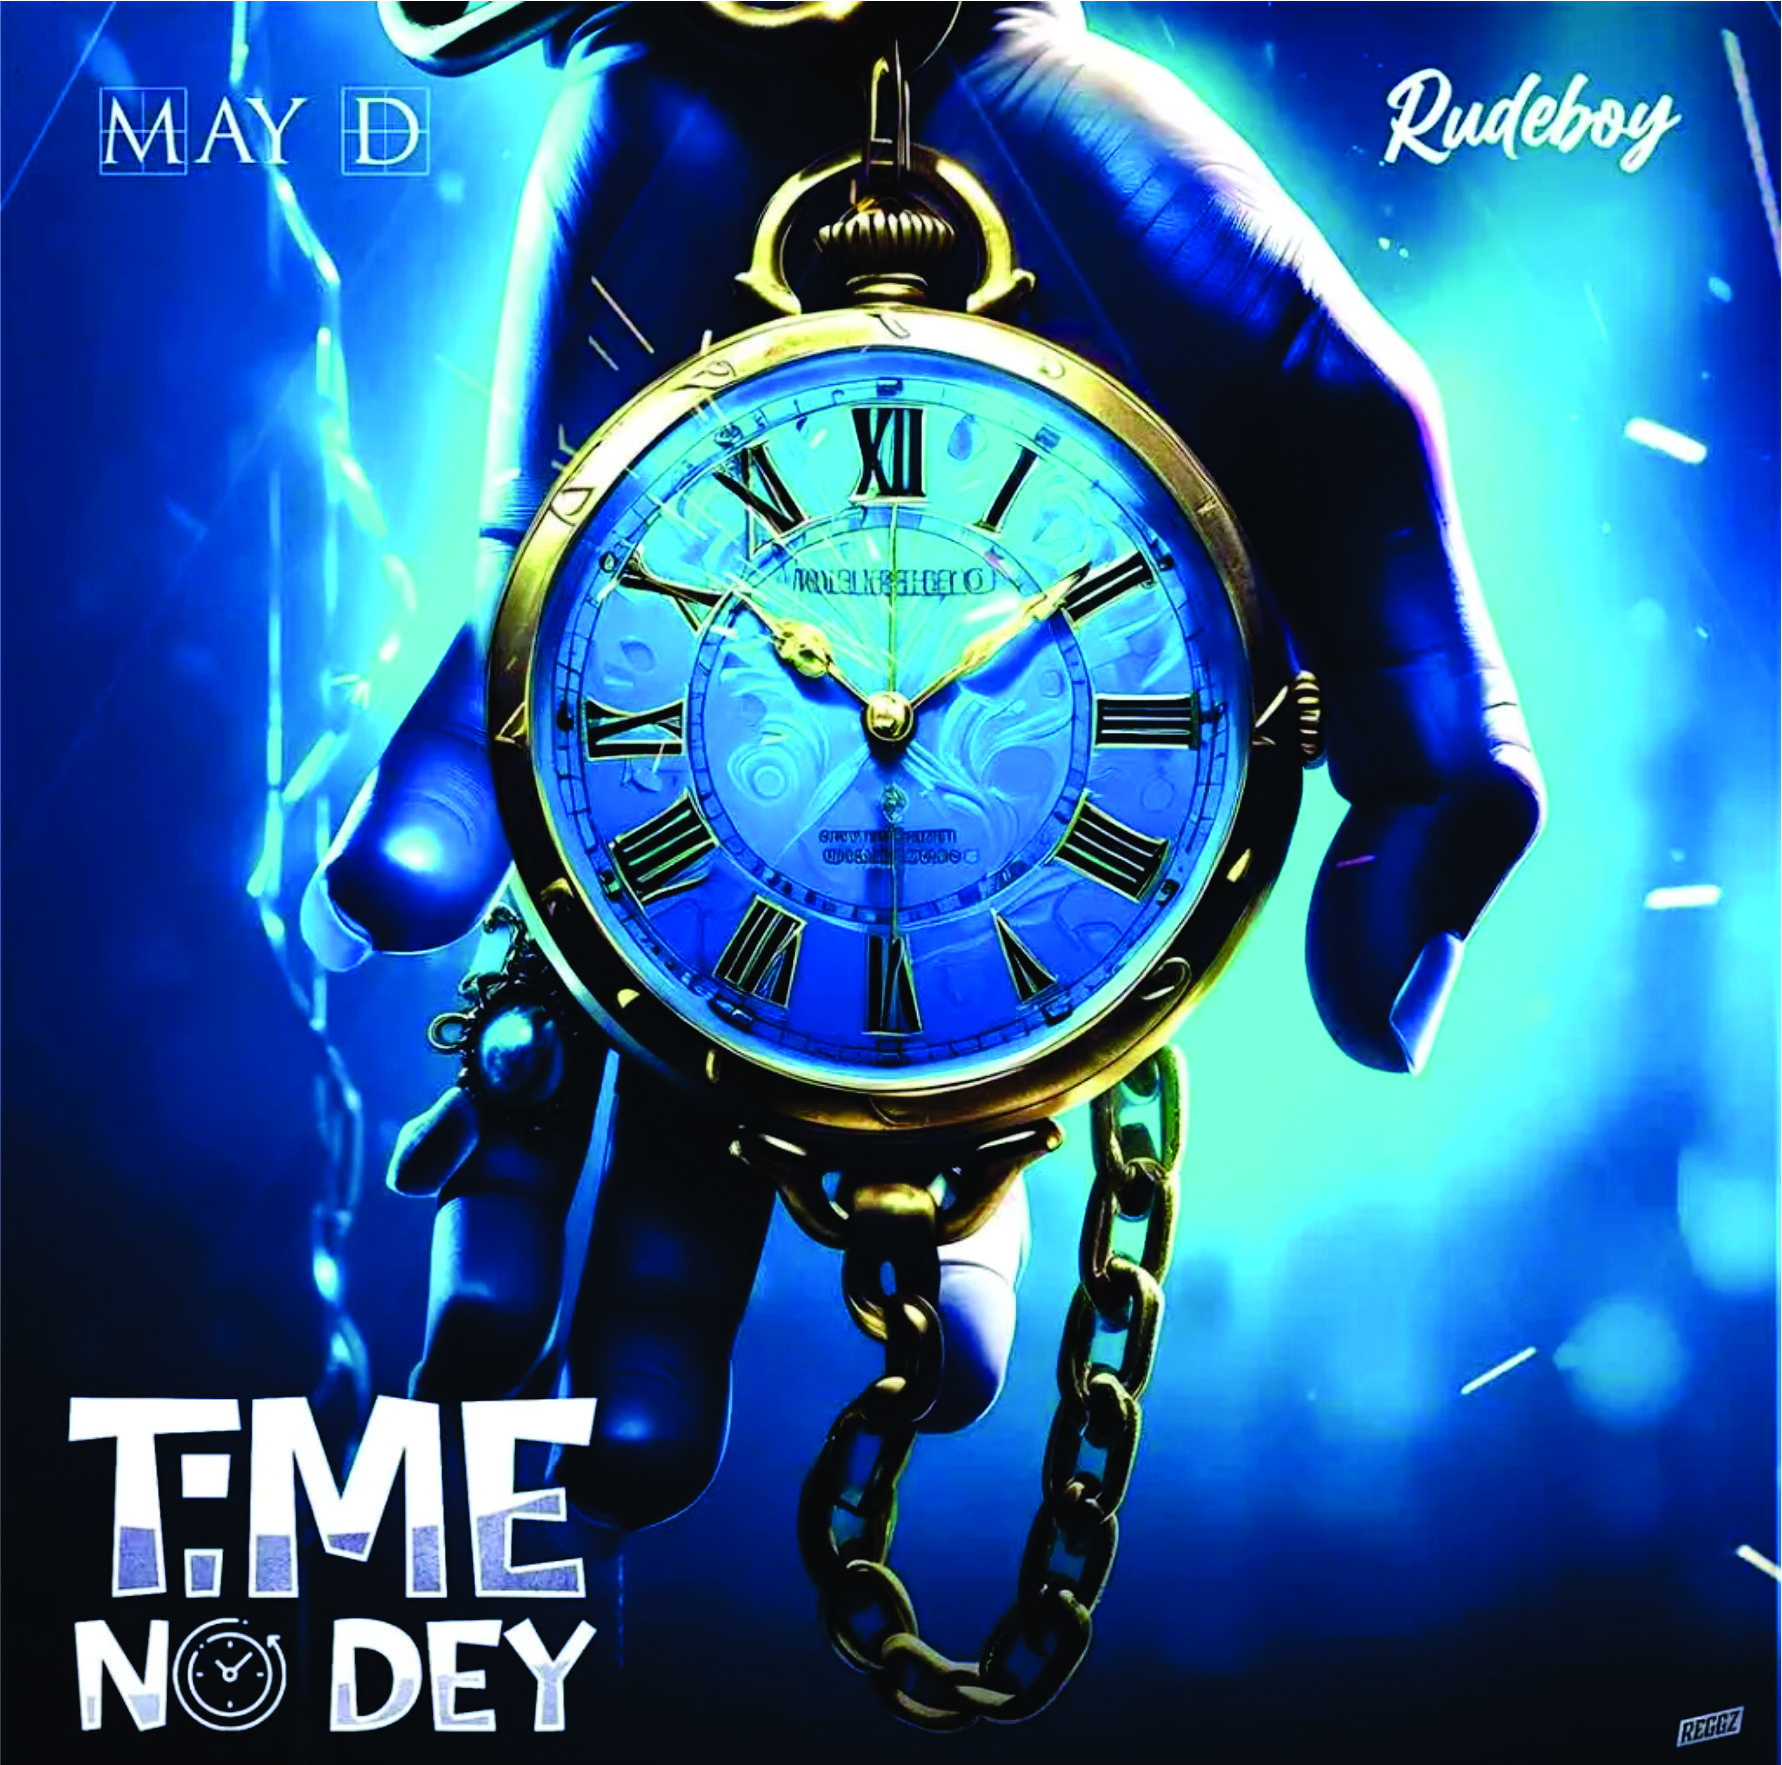 Download Music: May D – Time No Dey Ft. Rudeboy